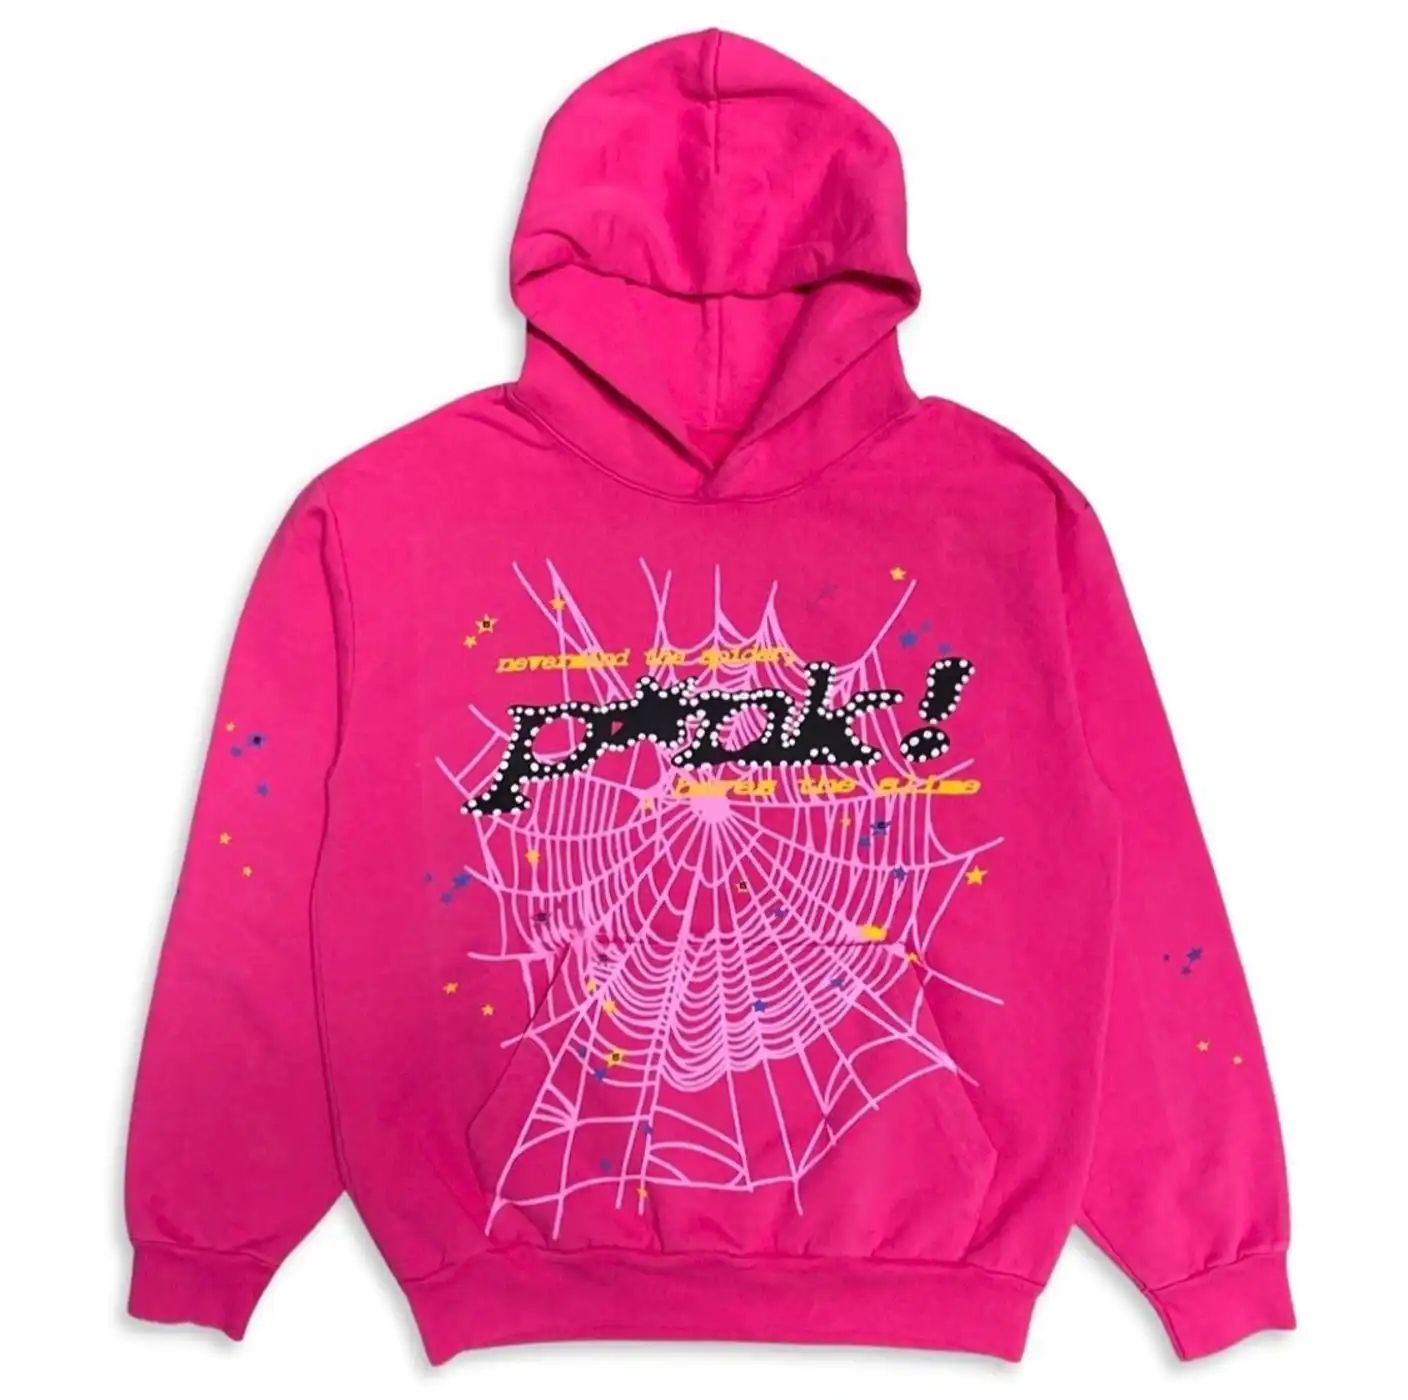 Young Thug Sp5der Worldwide P*NK Hoodie Spider Pink LARGE | Grailed